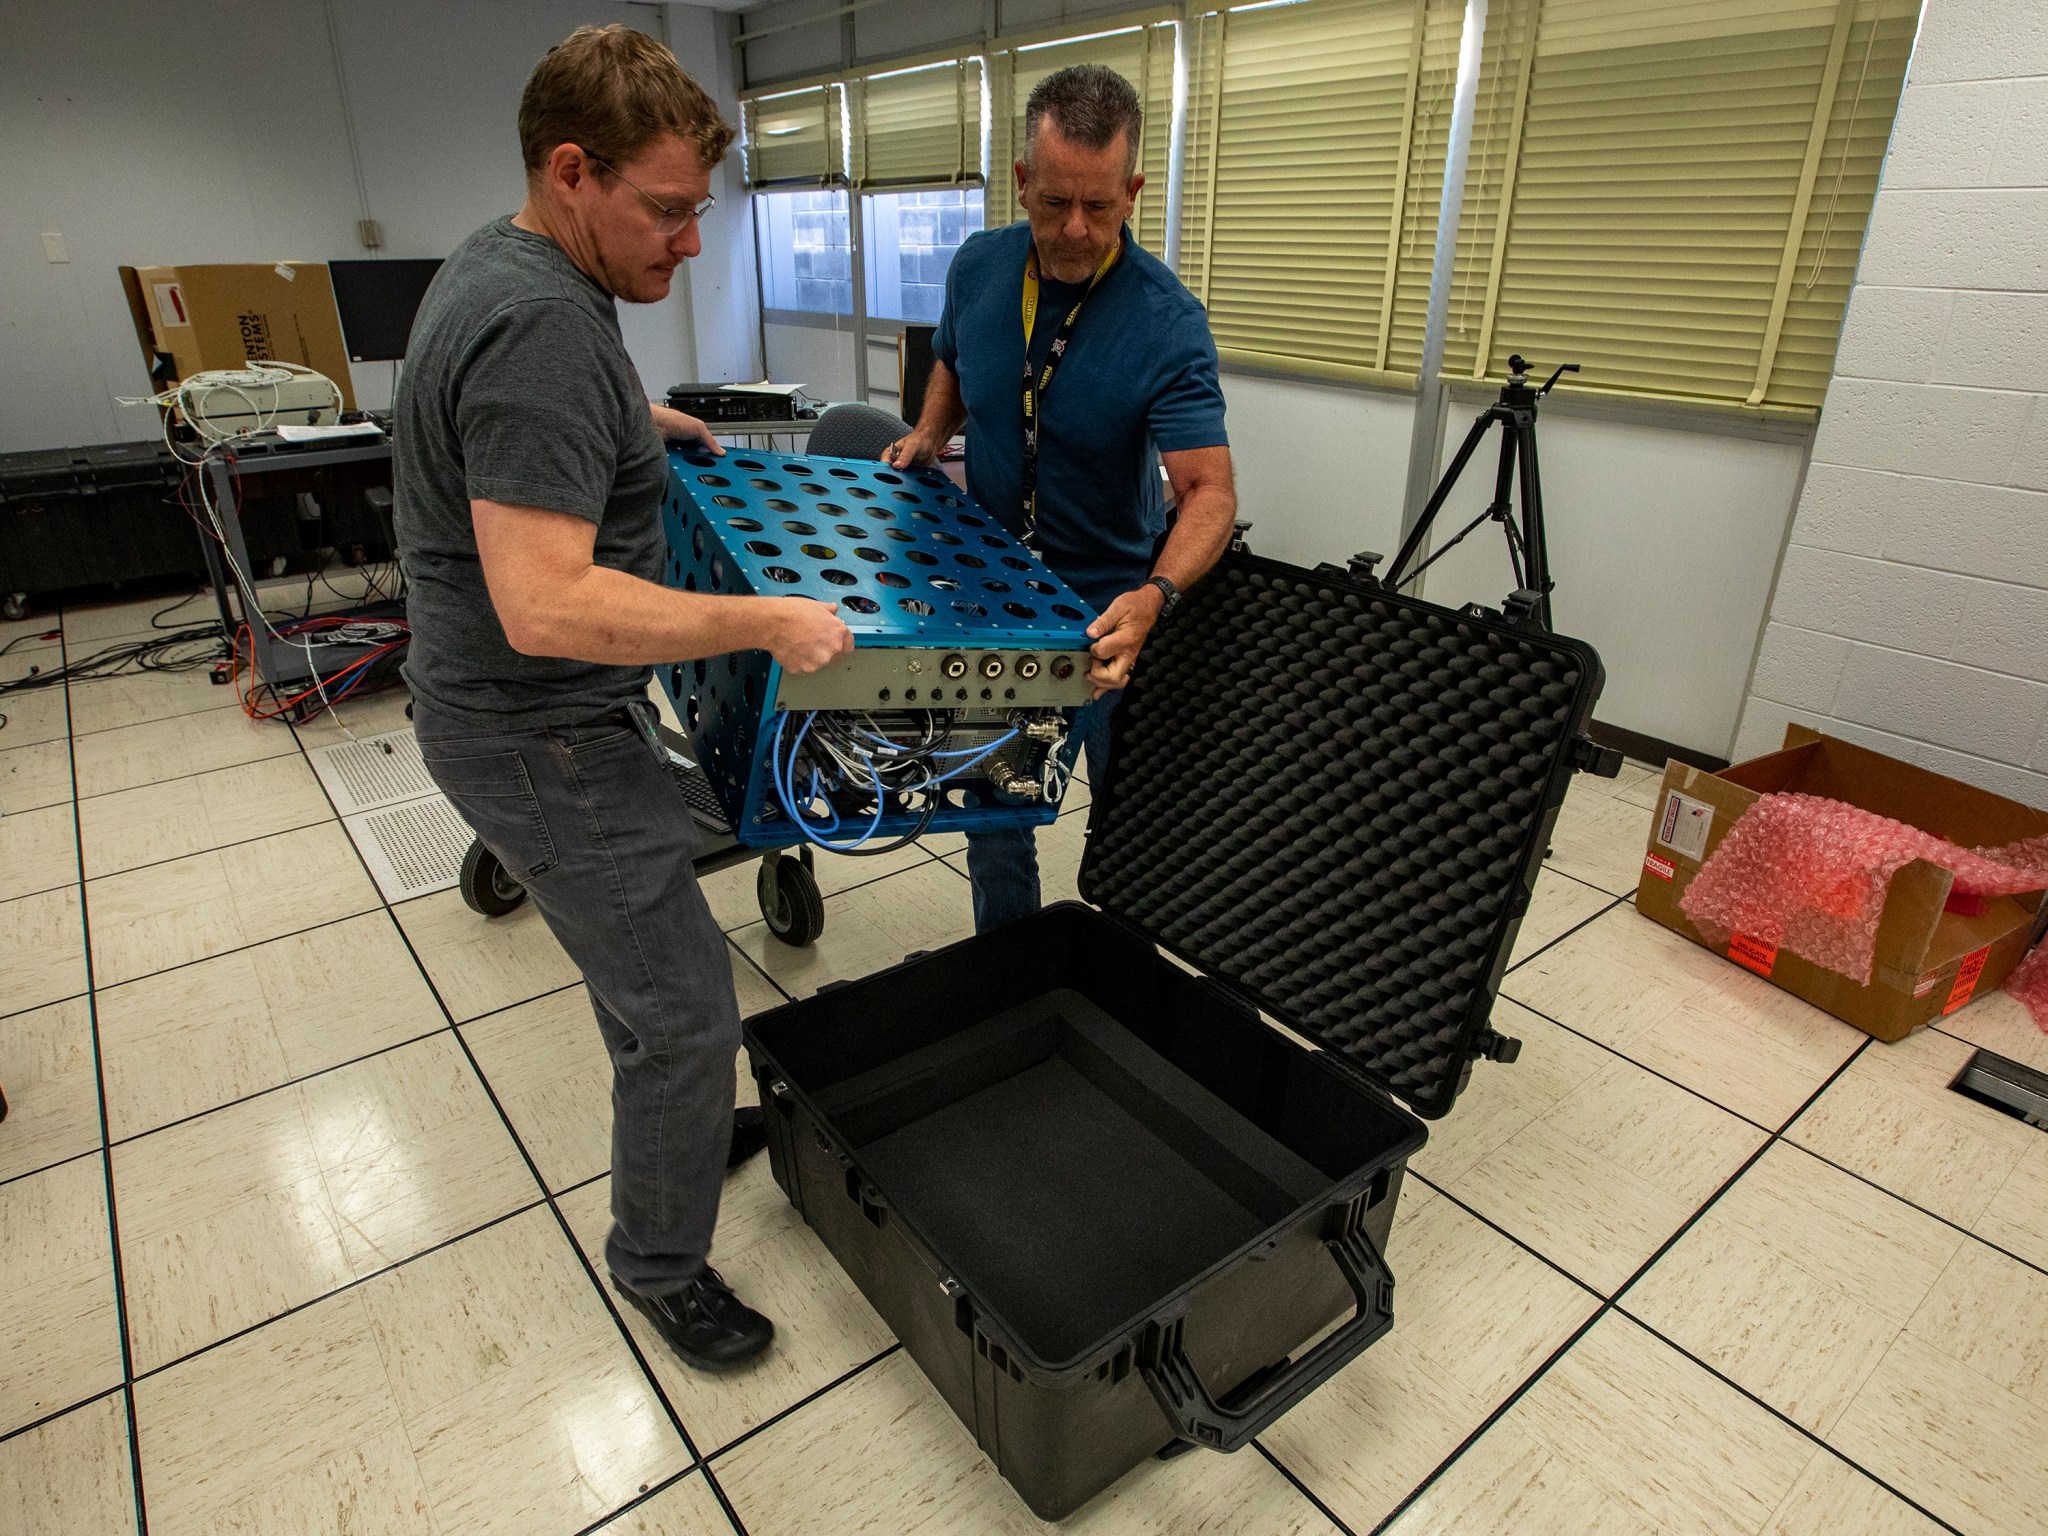 NASA researchers load the XVS into a shipping crate